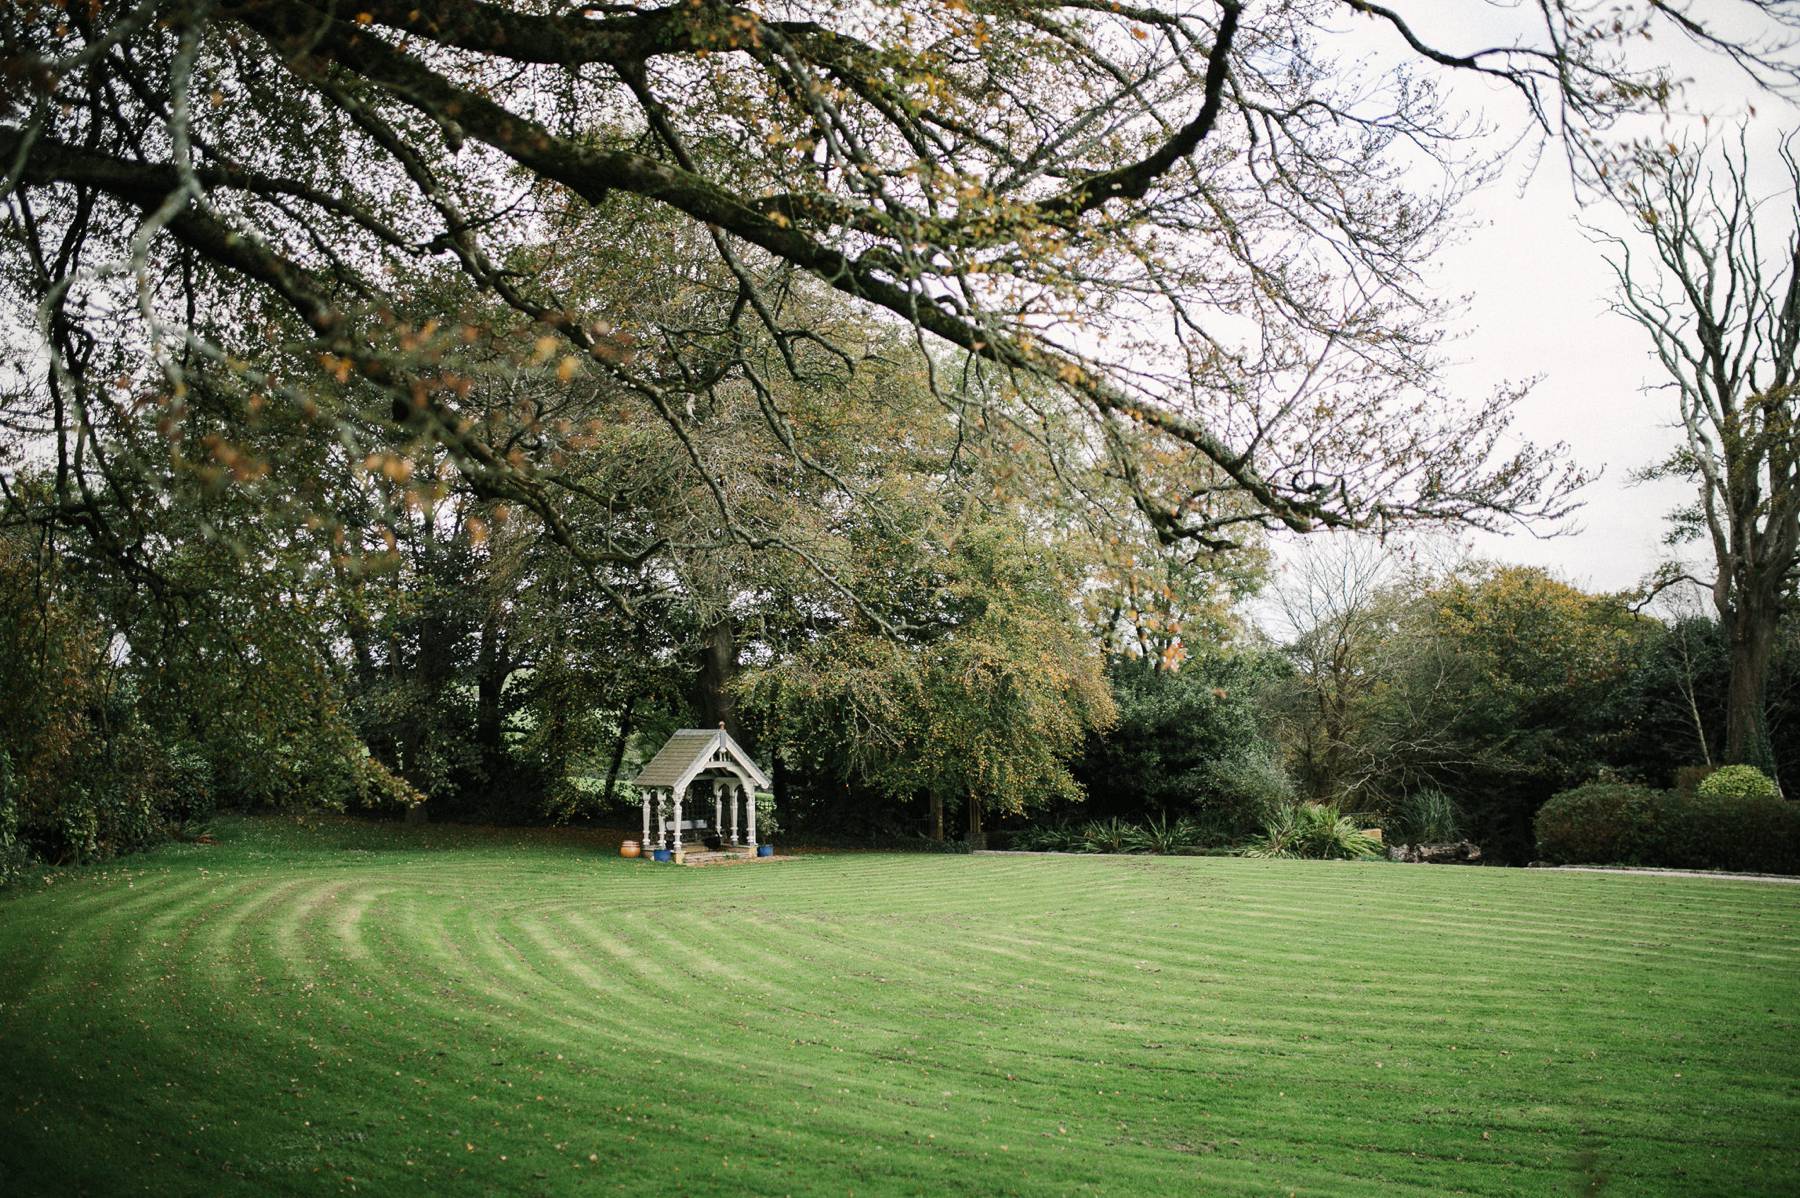 Lawn at Ballinacurra house